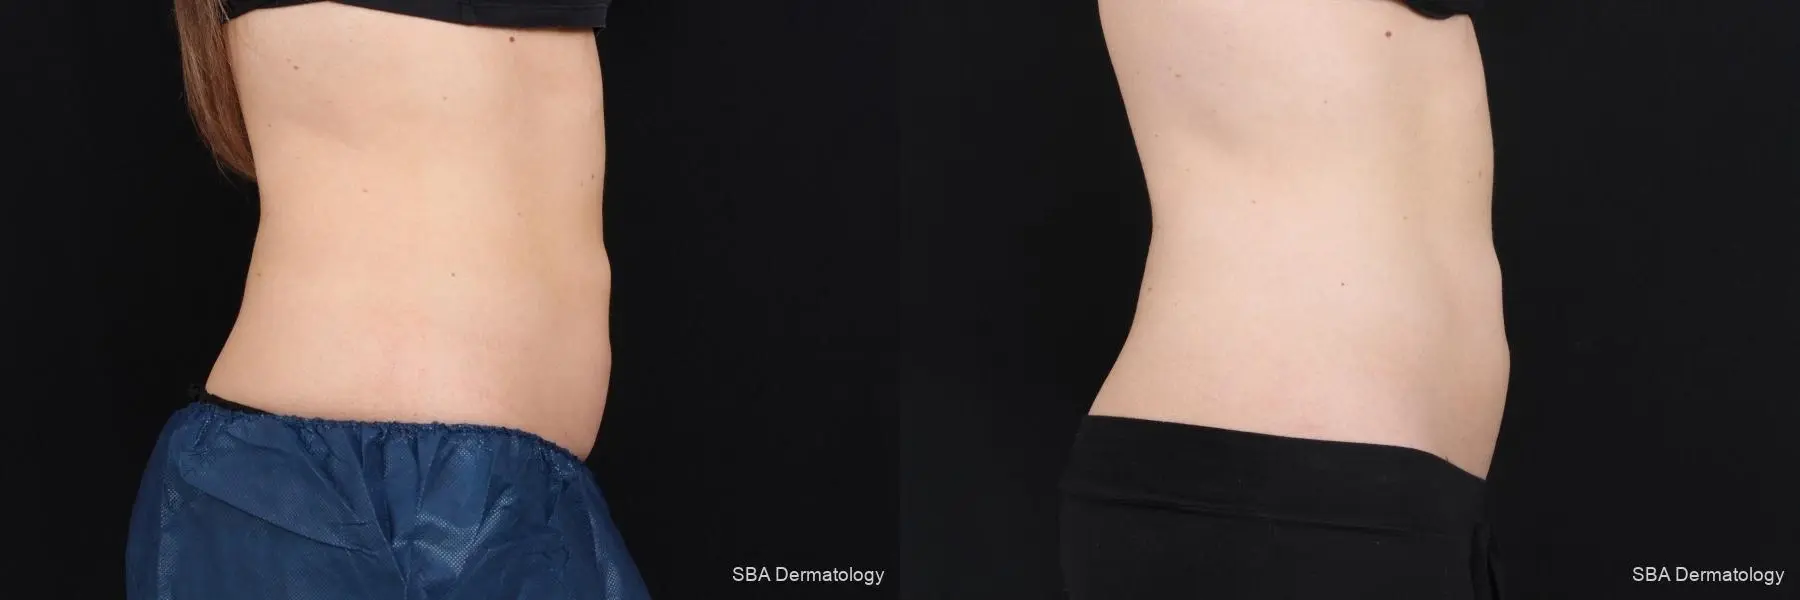 Coolsculpting: Patient 7 - Before and After 7